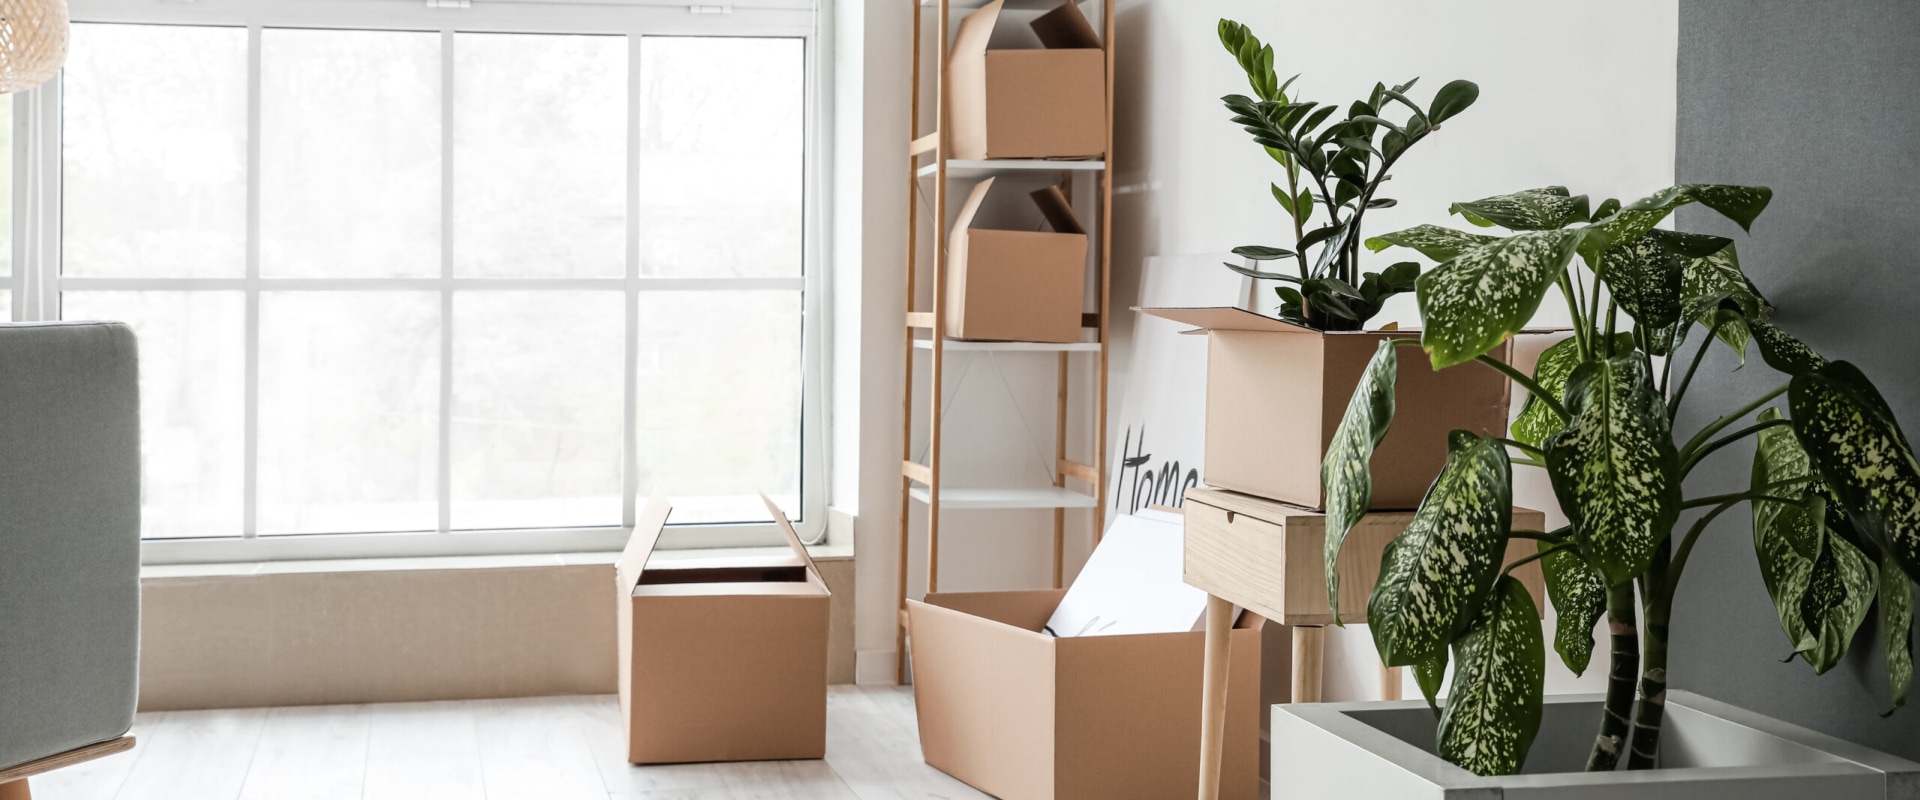 Why Hiring Professional Movers is the Best Choice for Your Long Distance Move